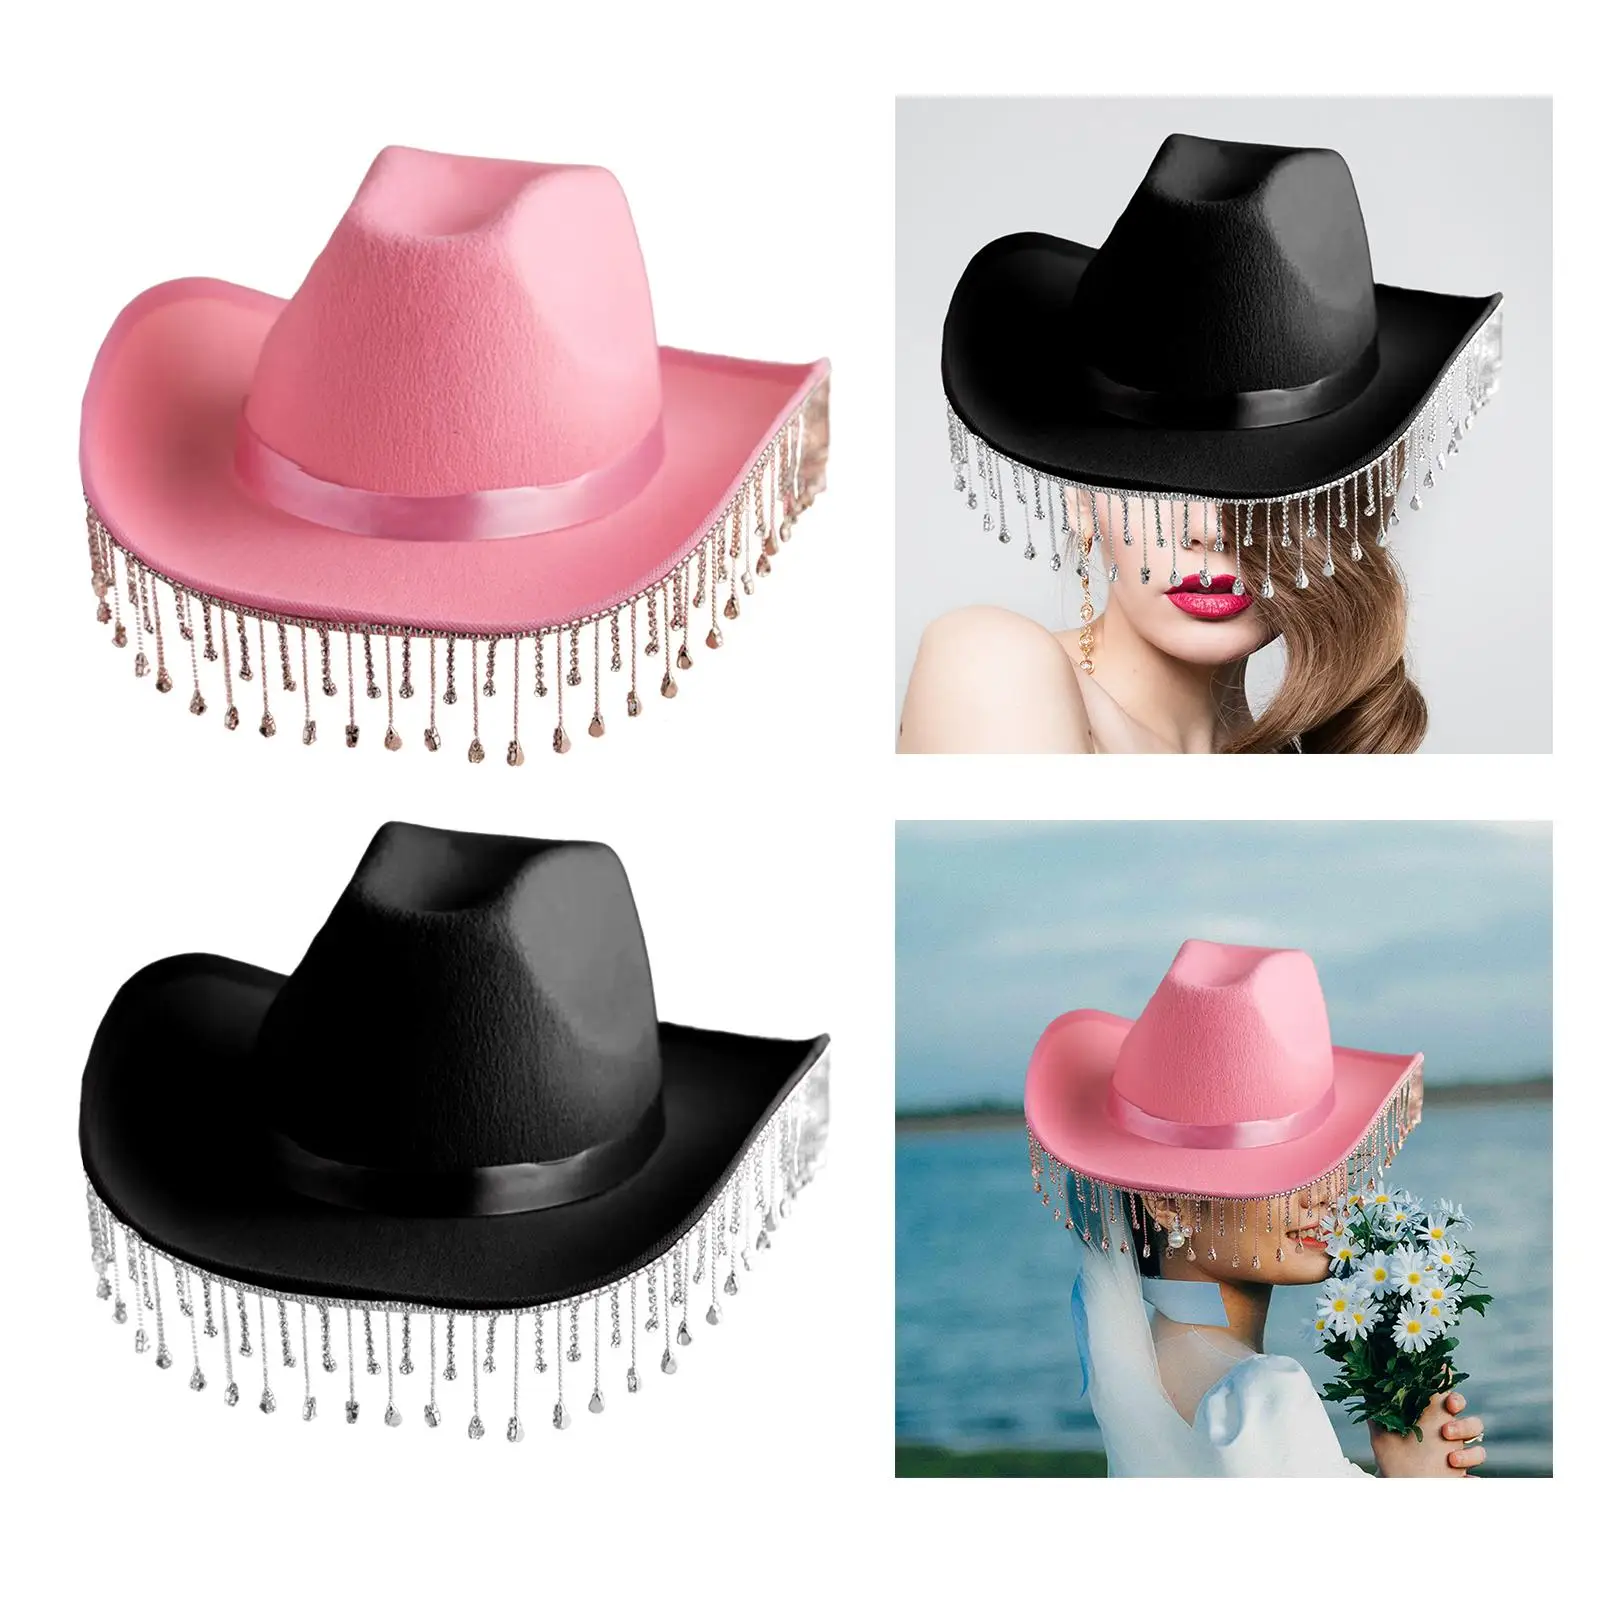 Rhinestone Bridal Cowgirl Hat Costume Hat Lightweight Wide Brim Simple and Generous for Music Festival Concerts Party Cosplay